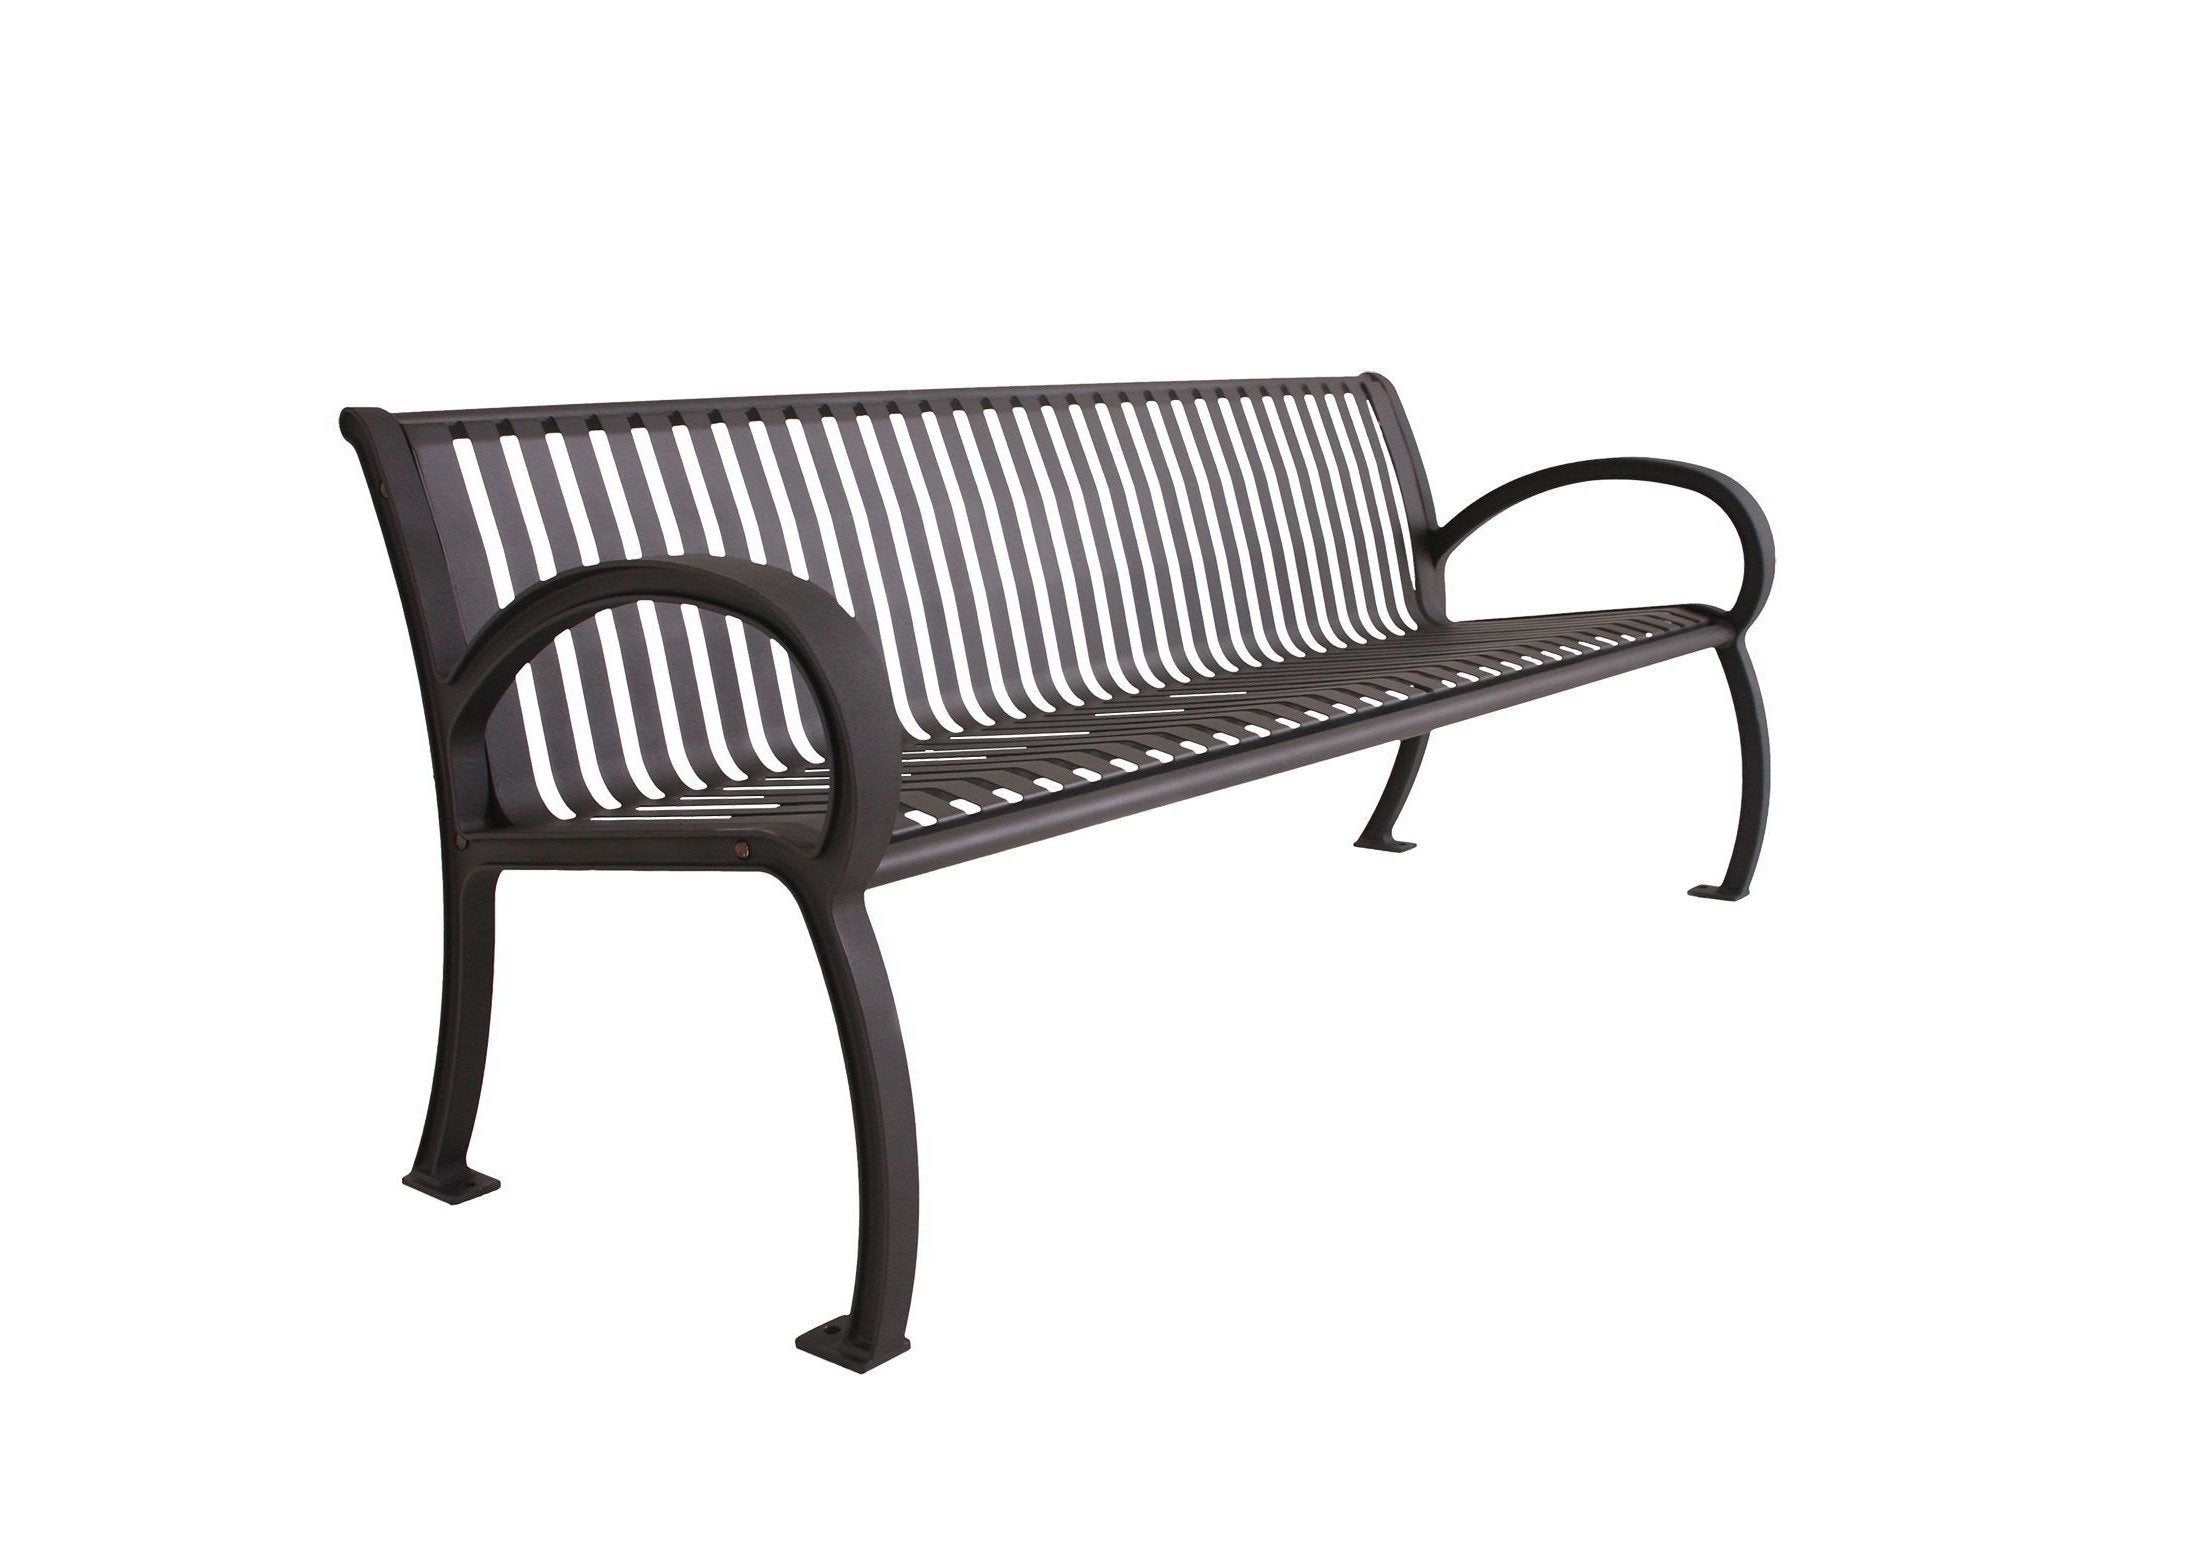 Wilmington Vertical Slat Bench with Back | WillyGoat Playground & Park Equipment